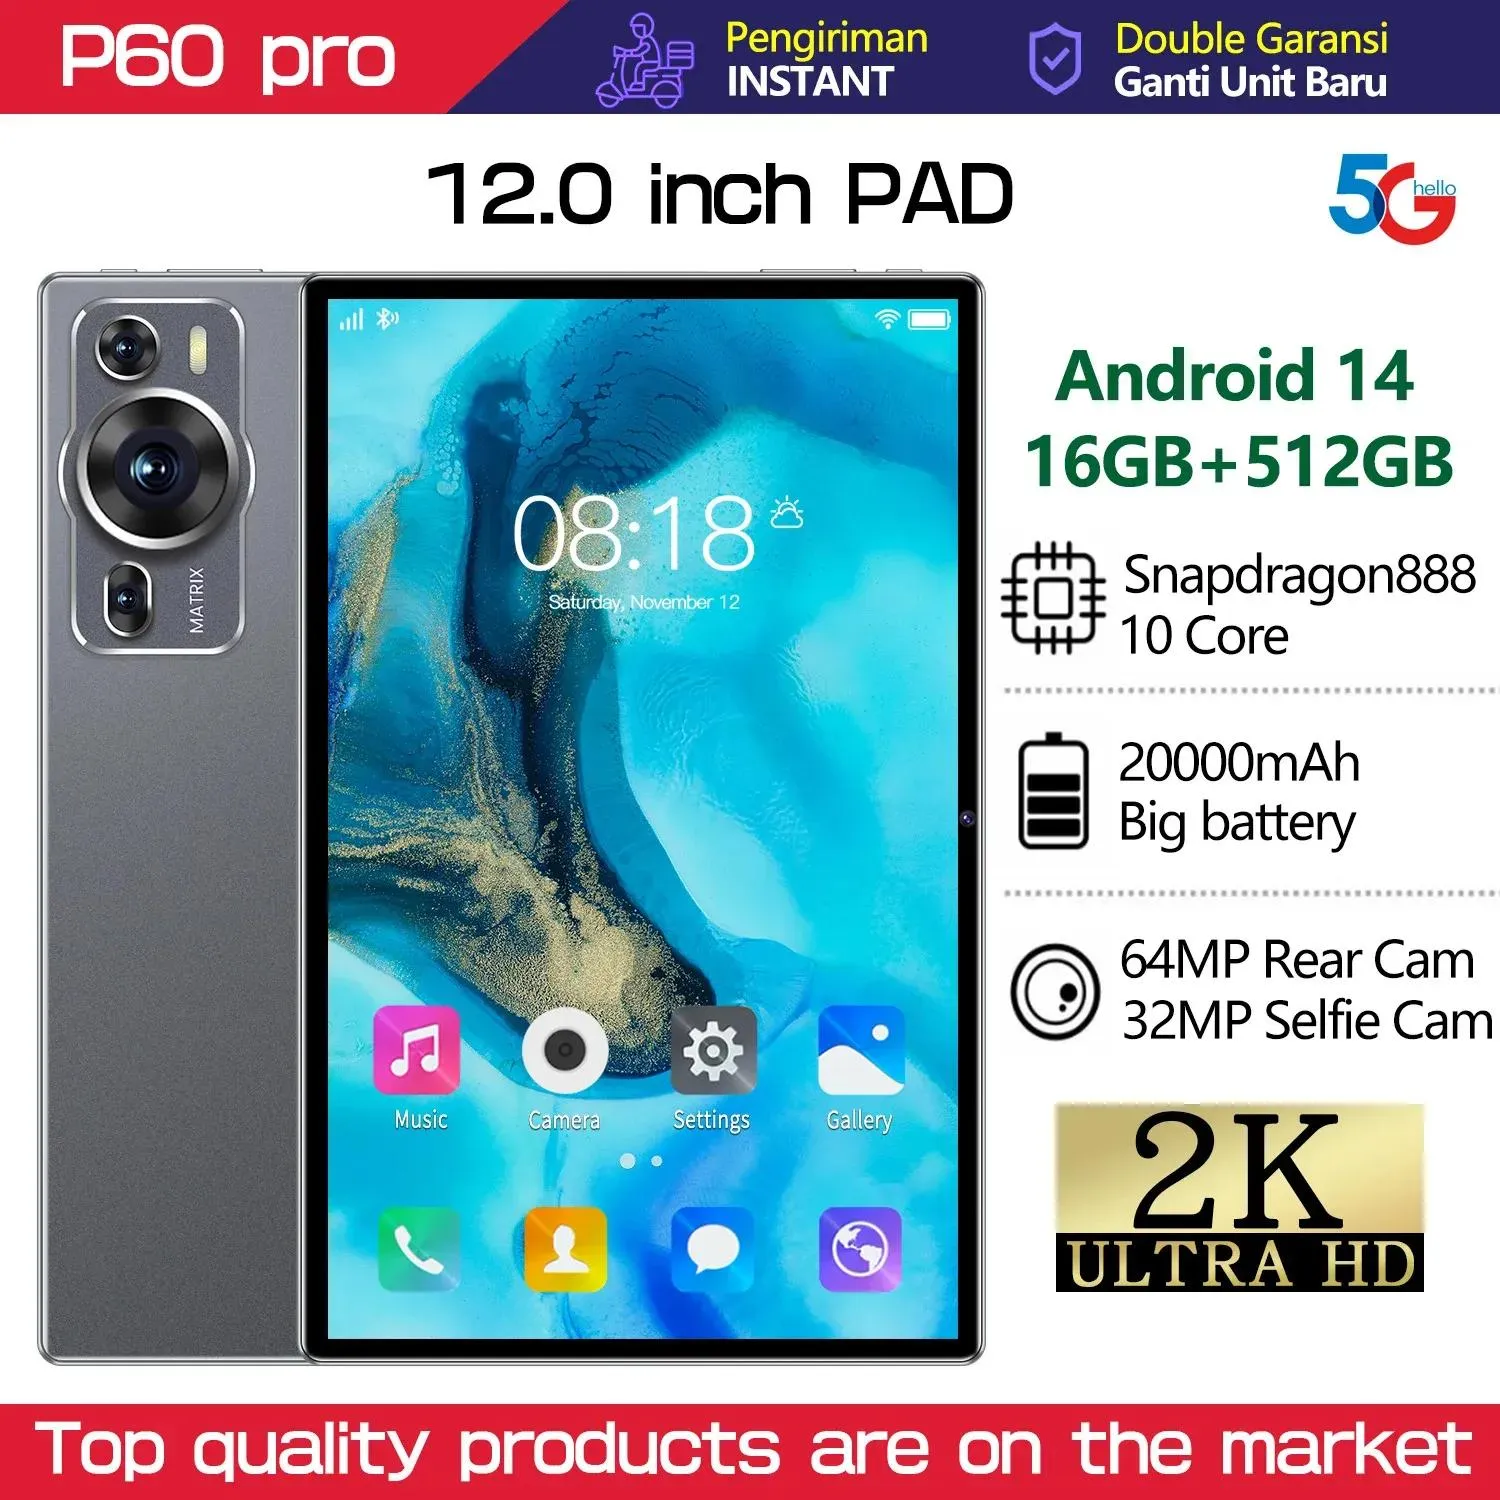 Бренд ПК Touch Tablet Android P60 Pro Global Tablette 12,0 дюйма HD 16G+512 ГБ Snapdragon 888 5G Двойная карта или Wi -Fi Google Play te te